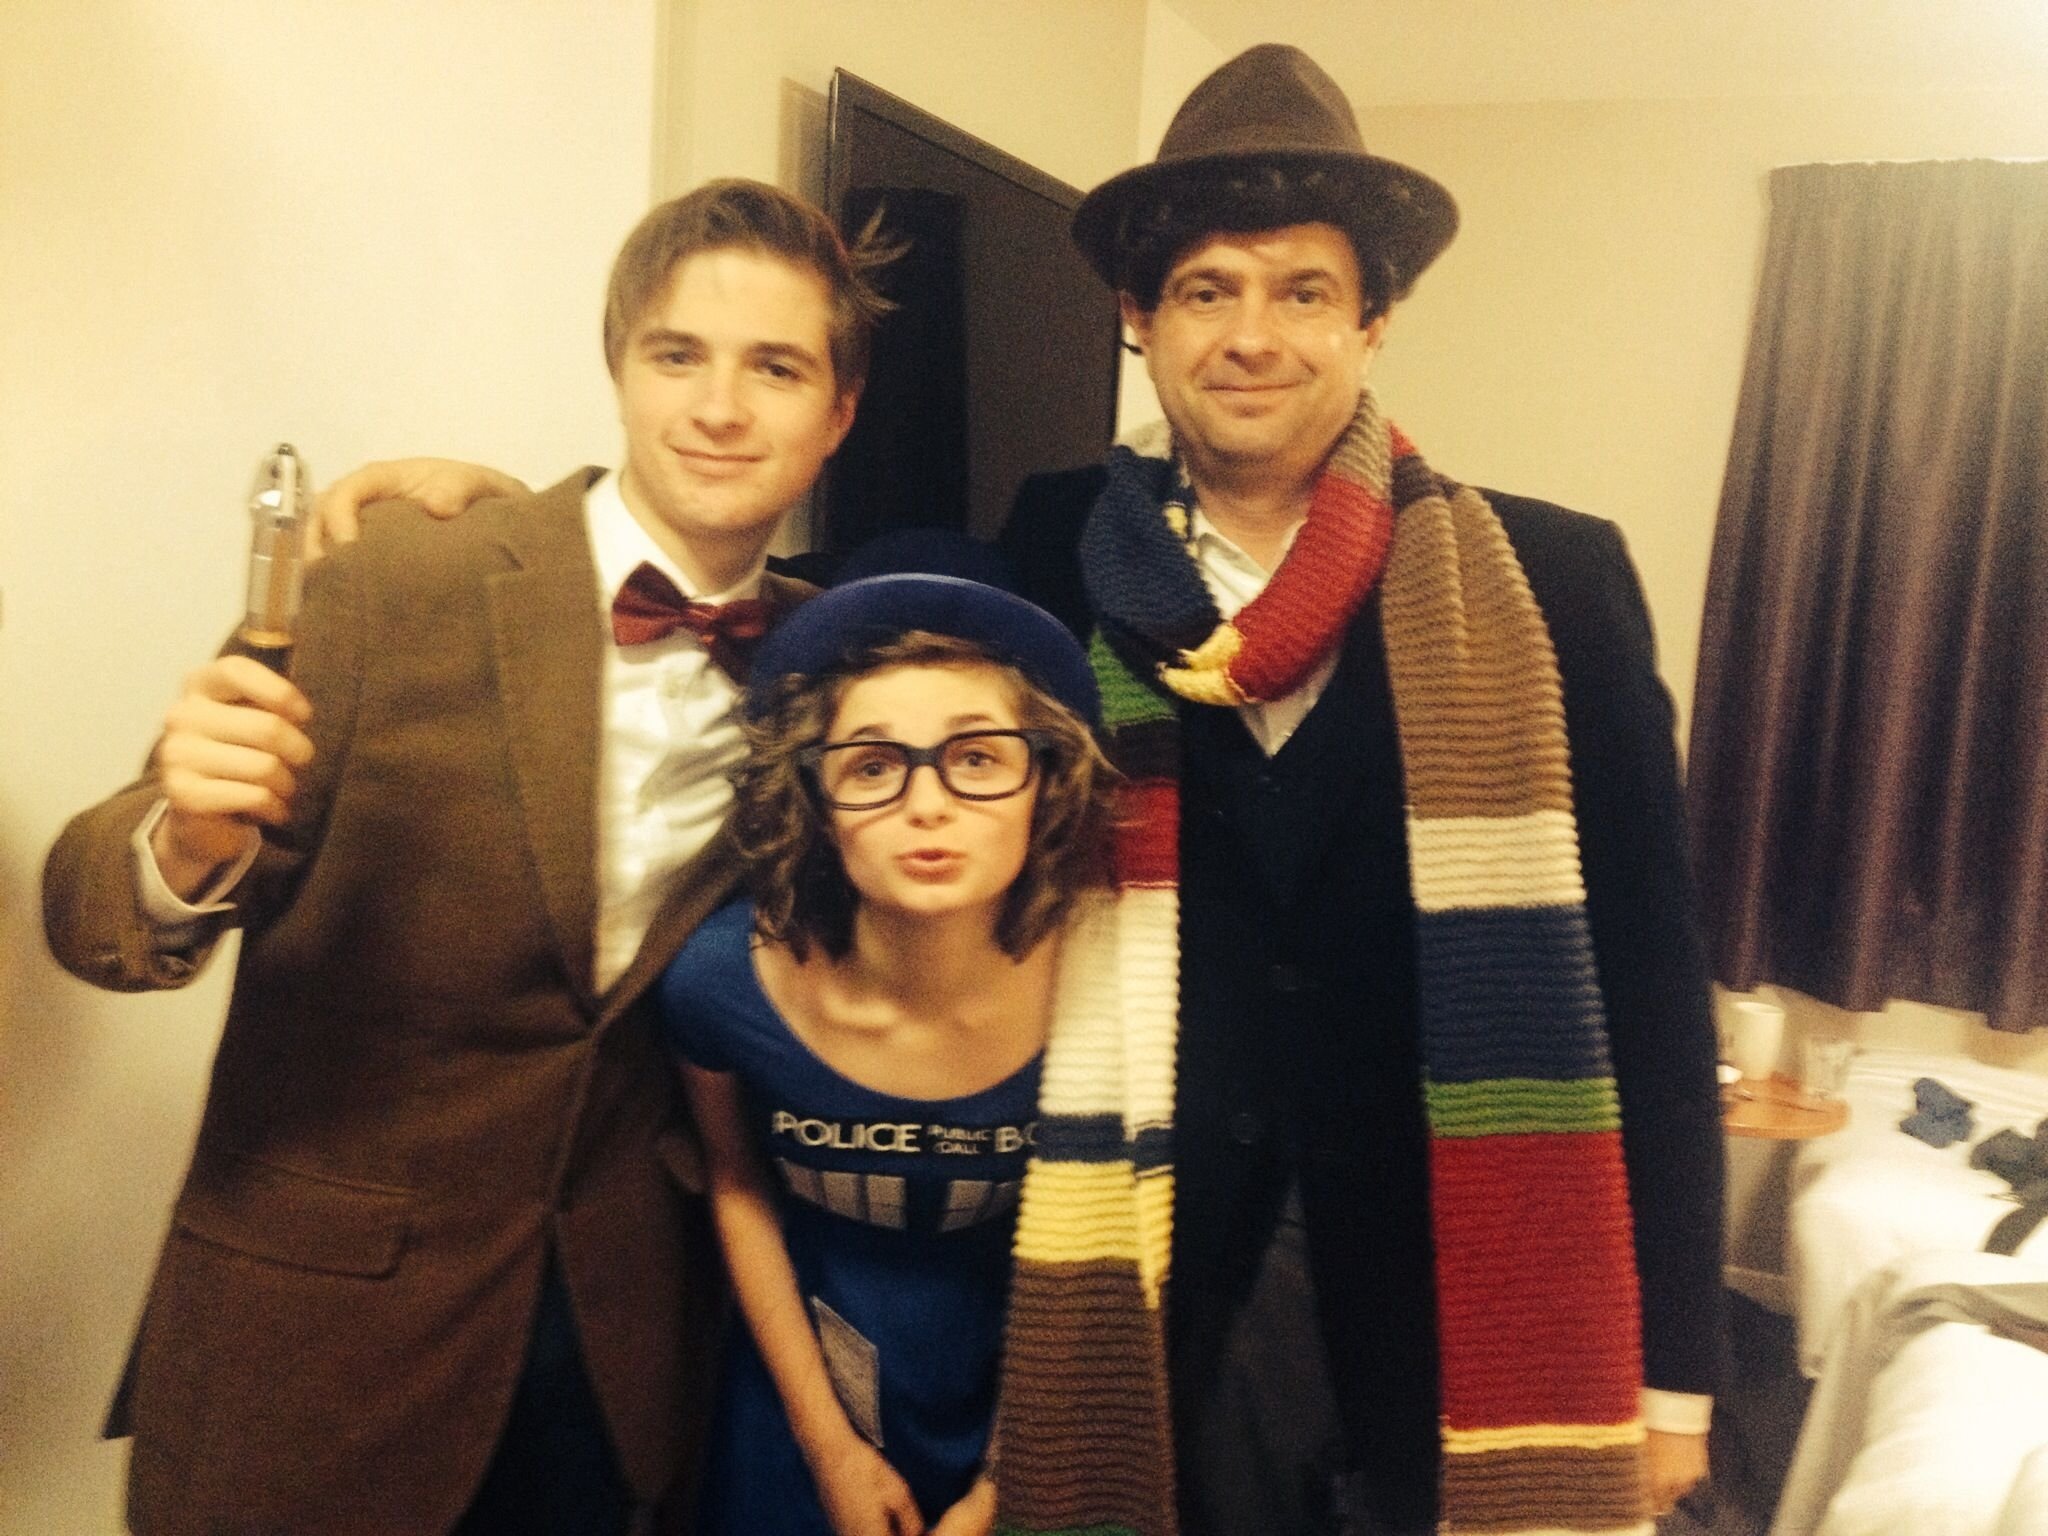 10 Unique Dr Who Halloween Costume Ideas dr who costumes tardis matt smith and tom baker doctor who 2022